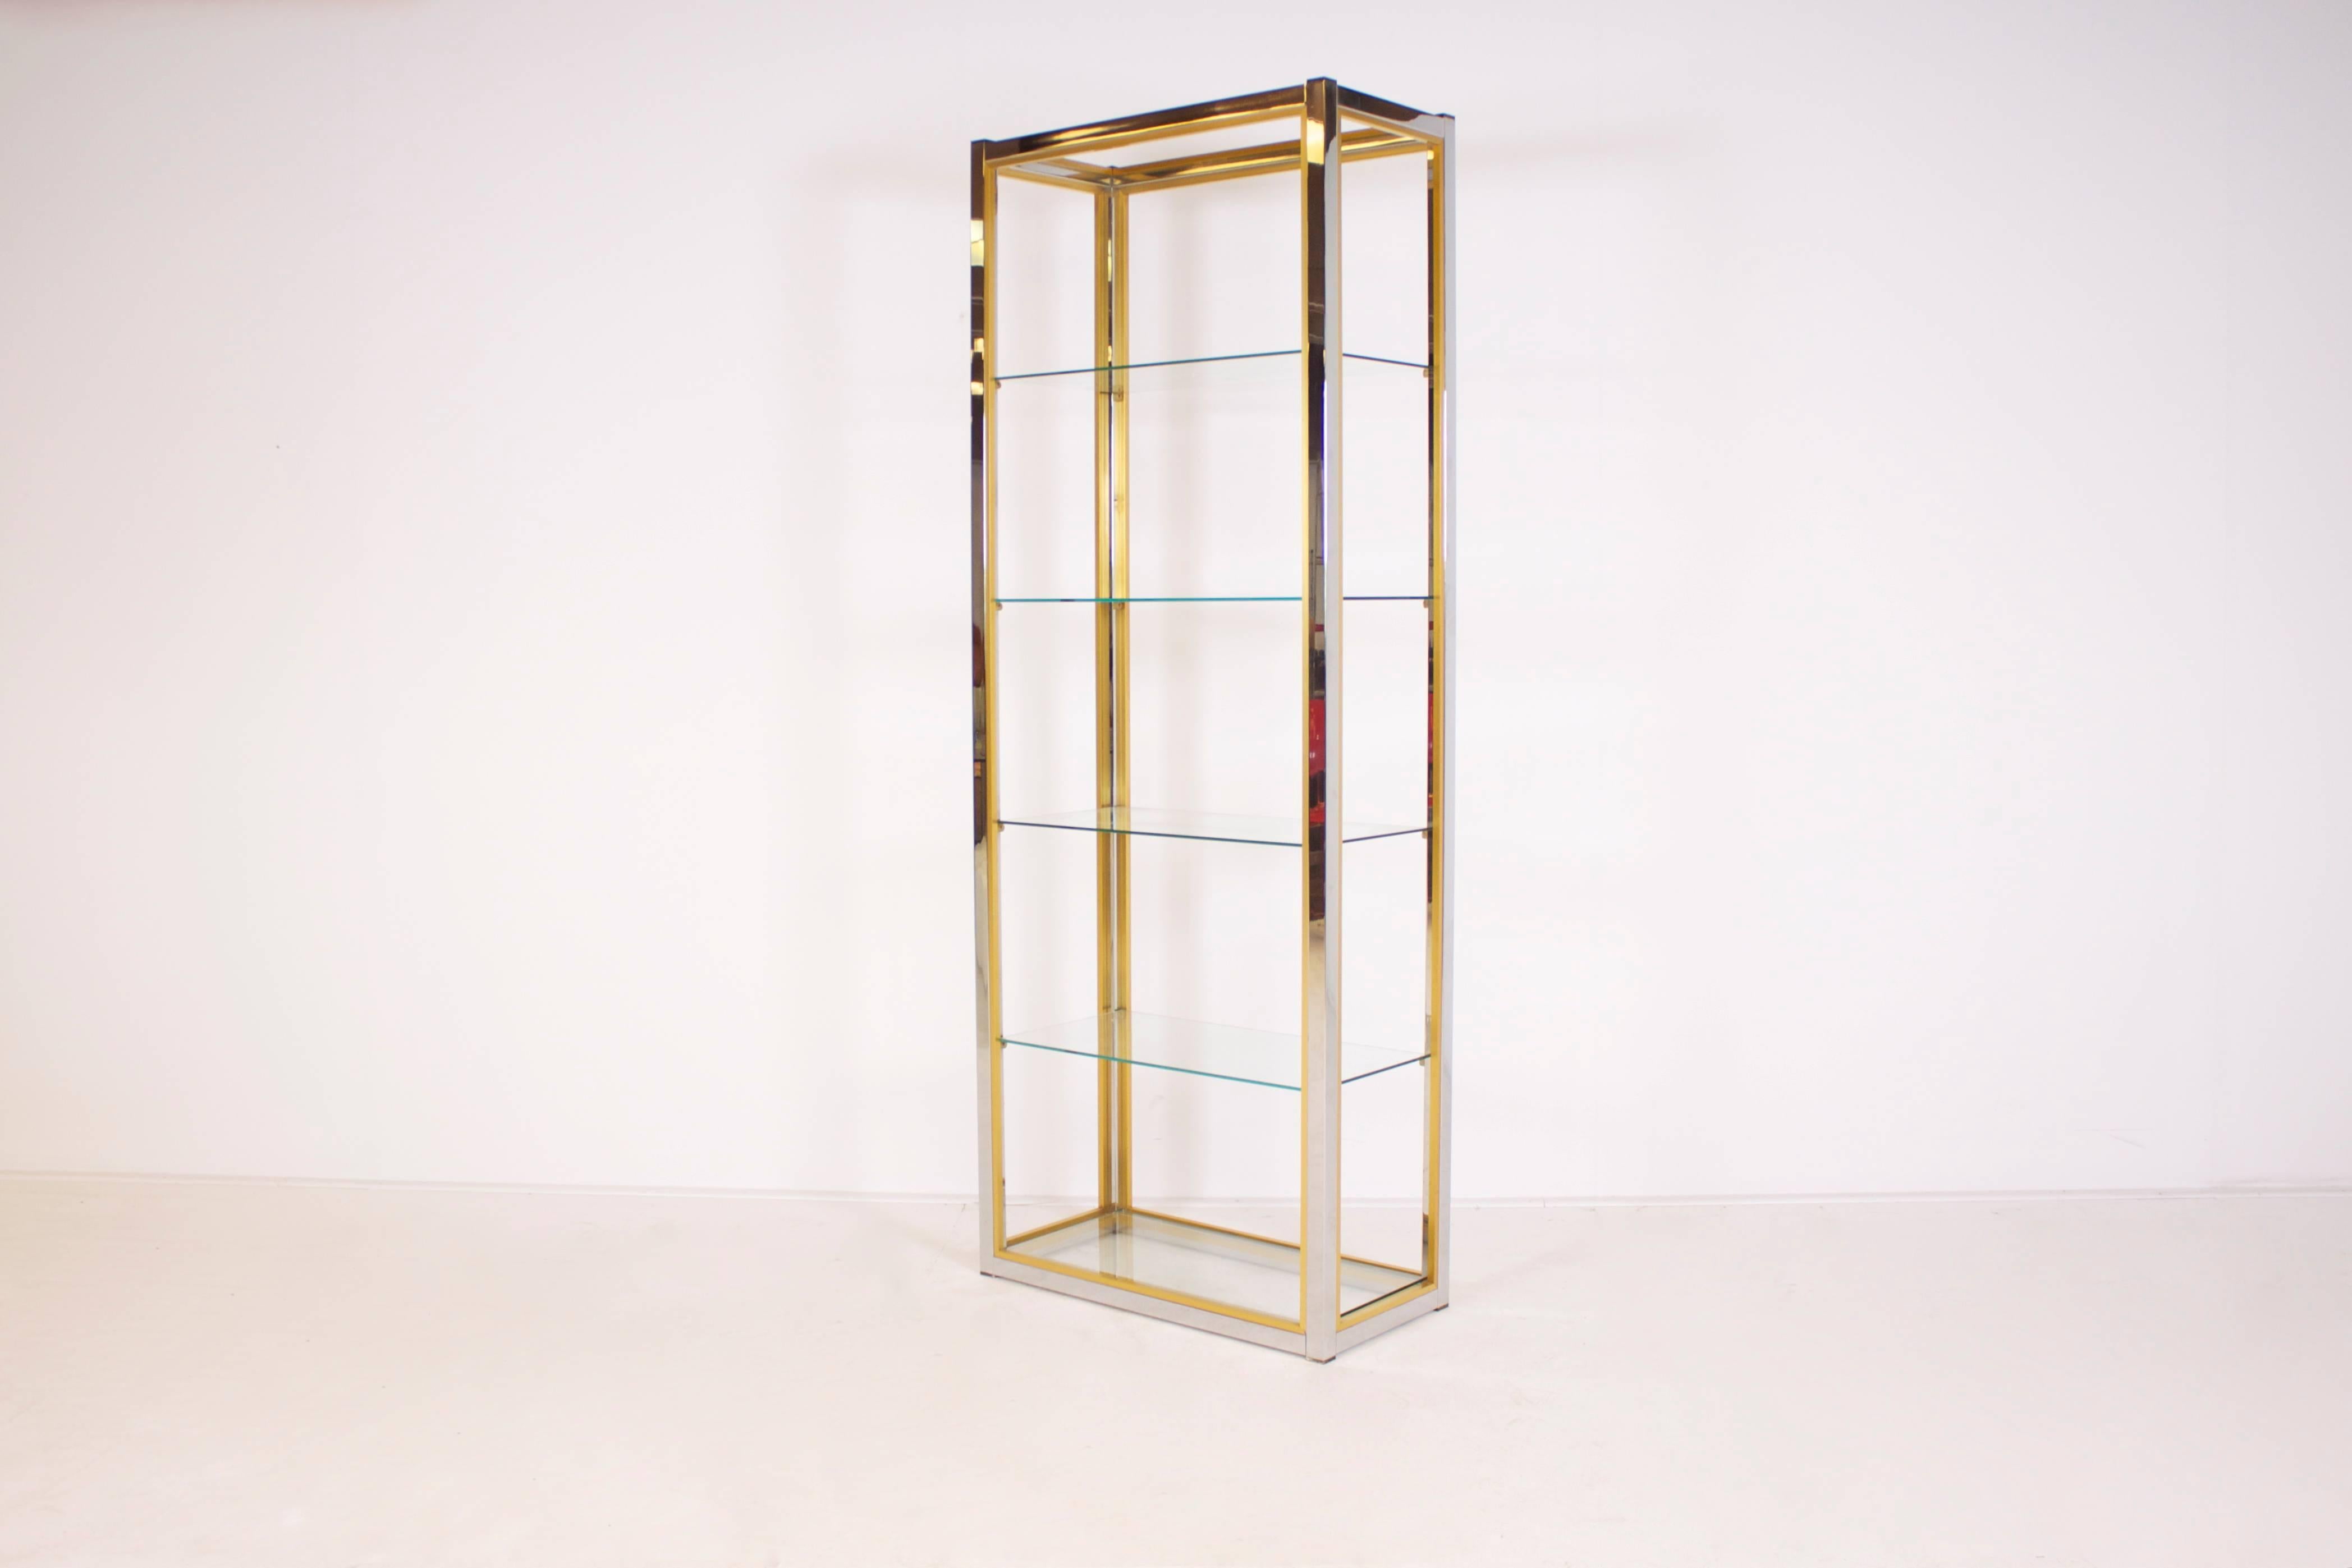 Large version étagère by the Italian designer Renato Zevi in very good condition.

Chrome structure with contrasting brass details.

Five glass shelves of which one is situated at the base.

Can also be used as a room divider. 

If you have any